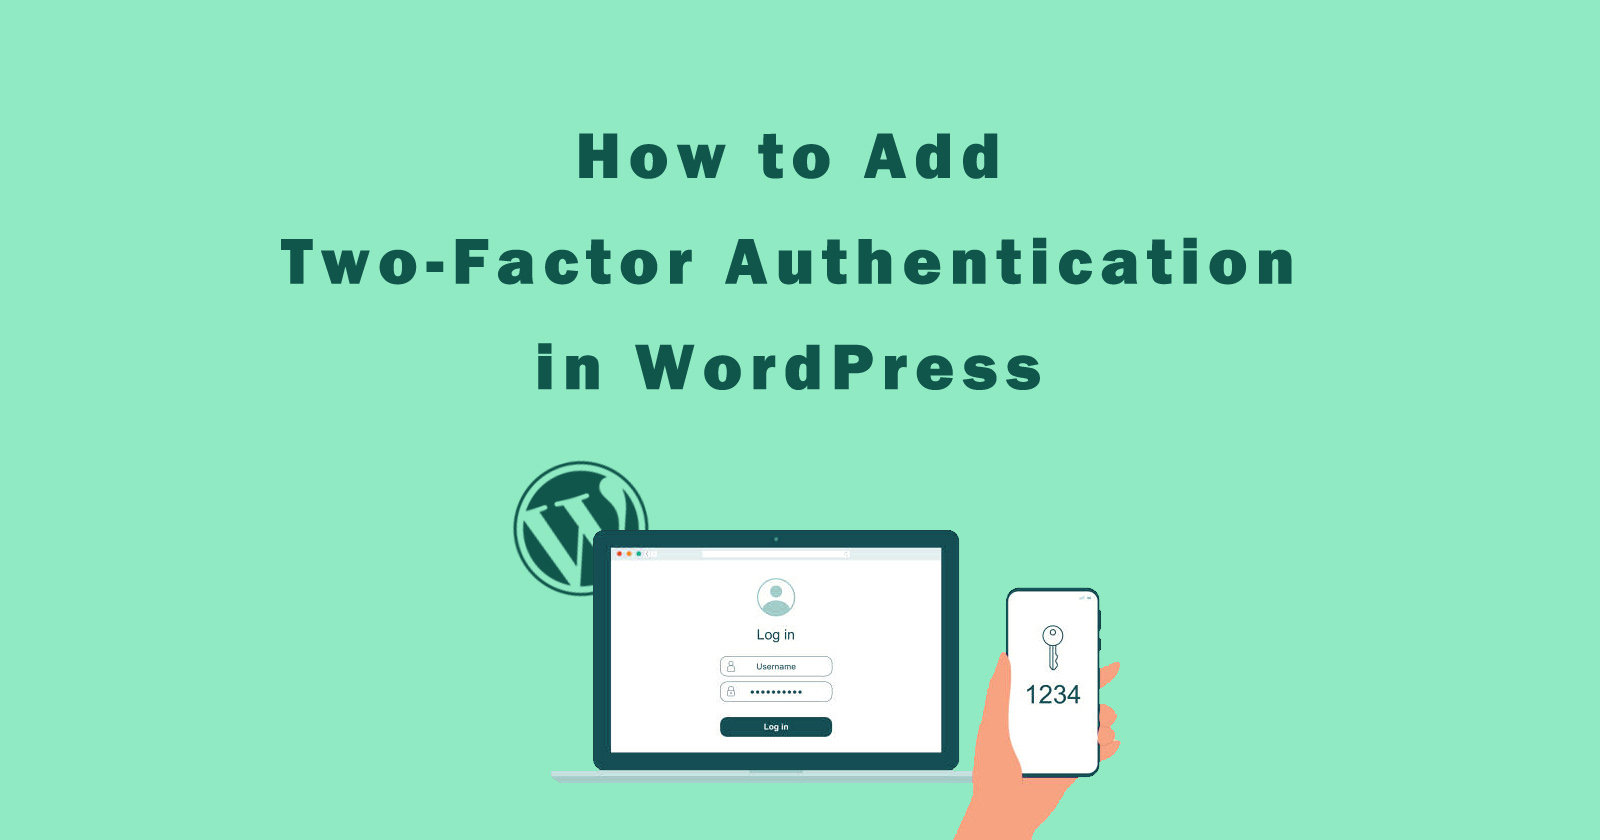 How to Add Two-Factor Authentication in WordPress?